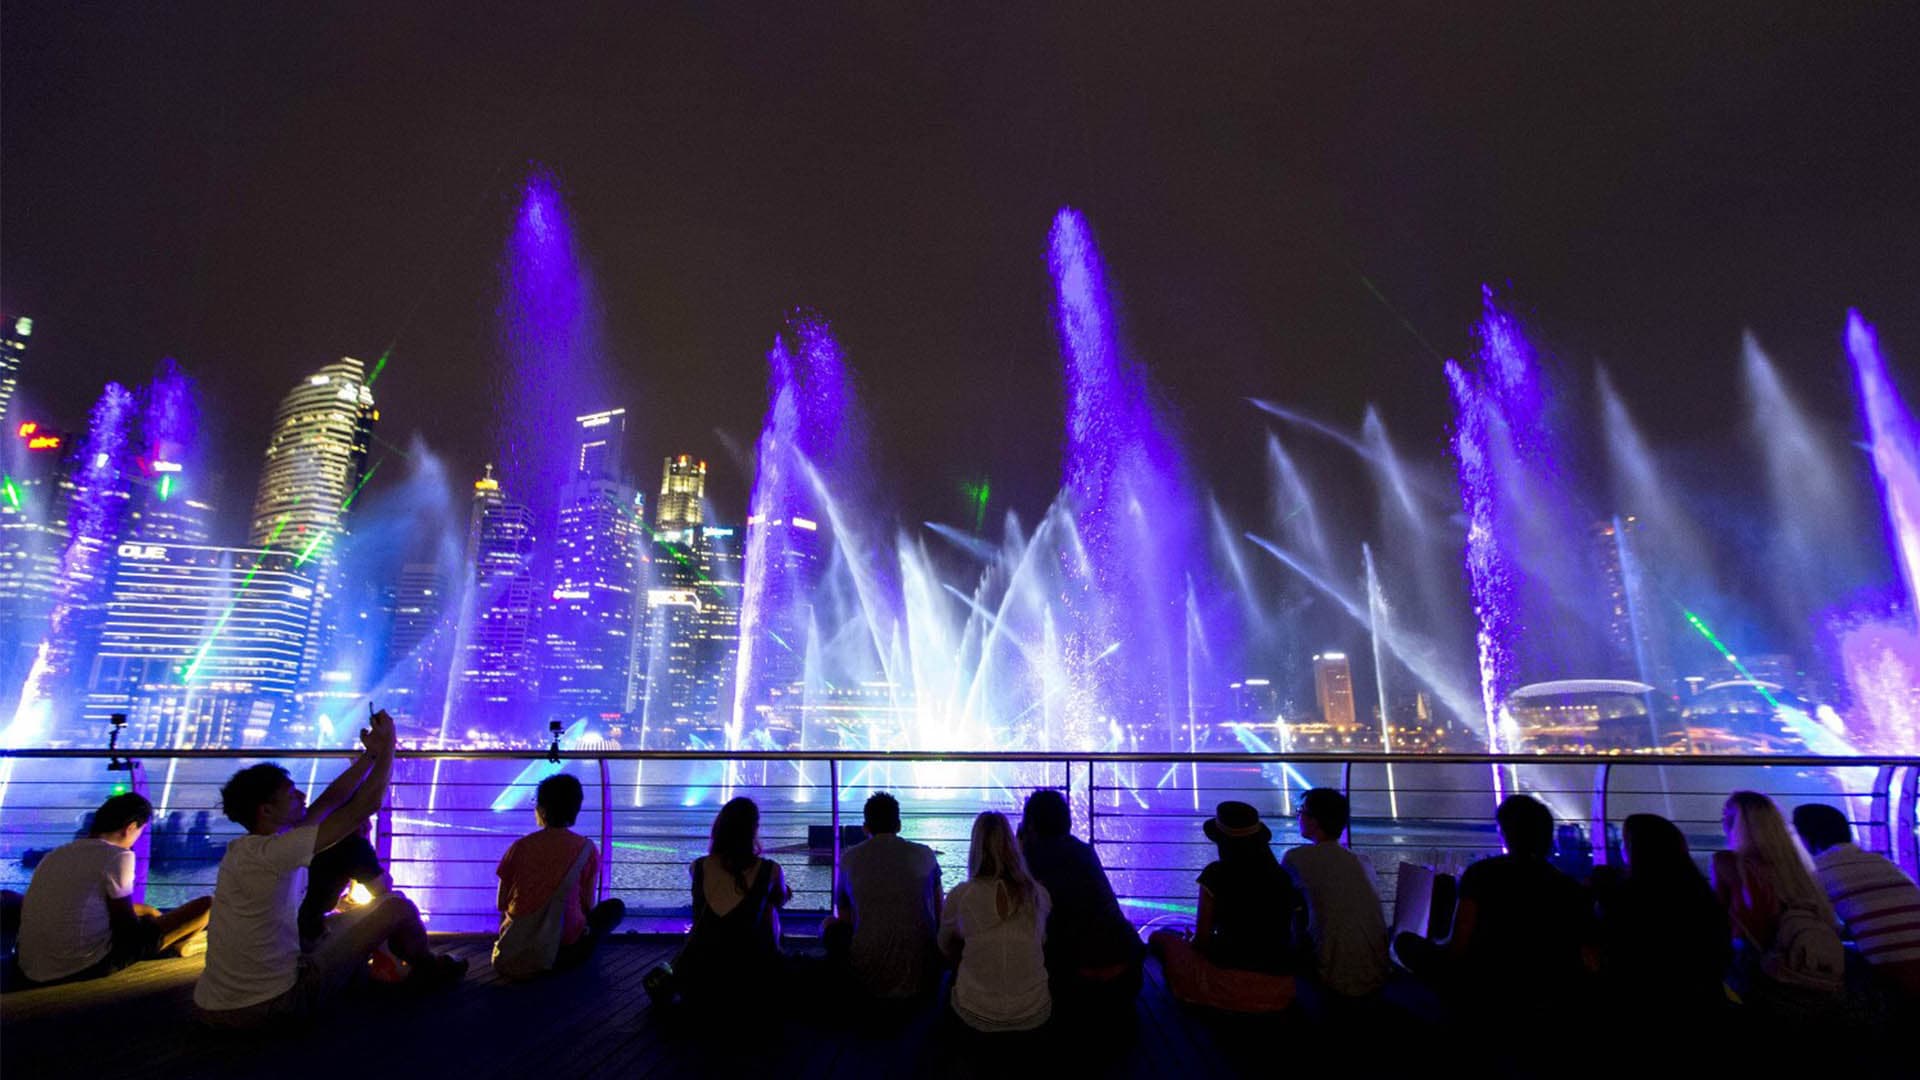 A light and water show in Singapore